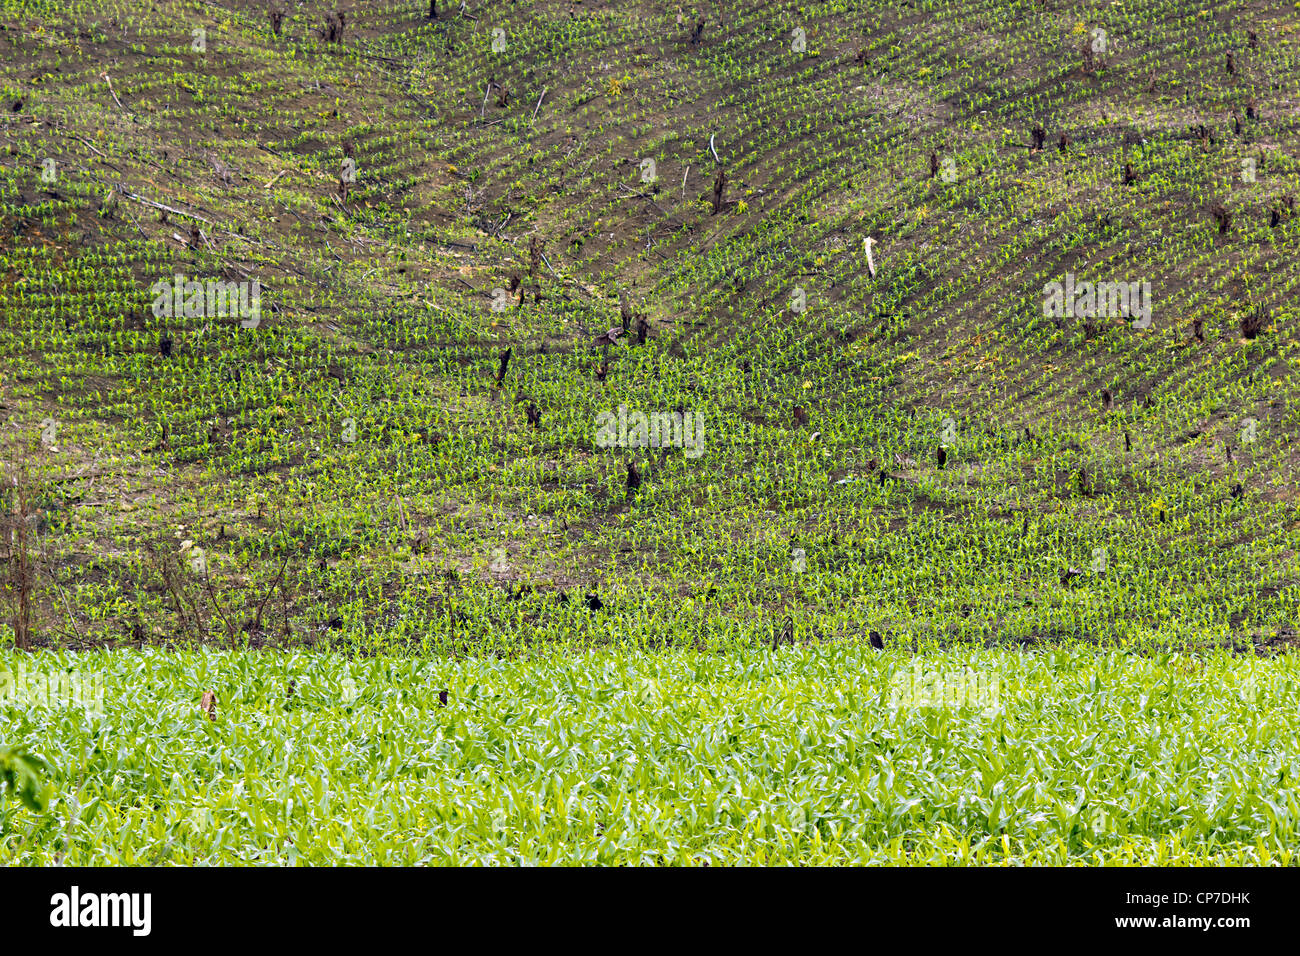 Slash and burn cultivation in Western Ecuador, steep slope cleared and planted with maize seedlings. Stock Photo